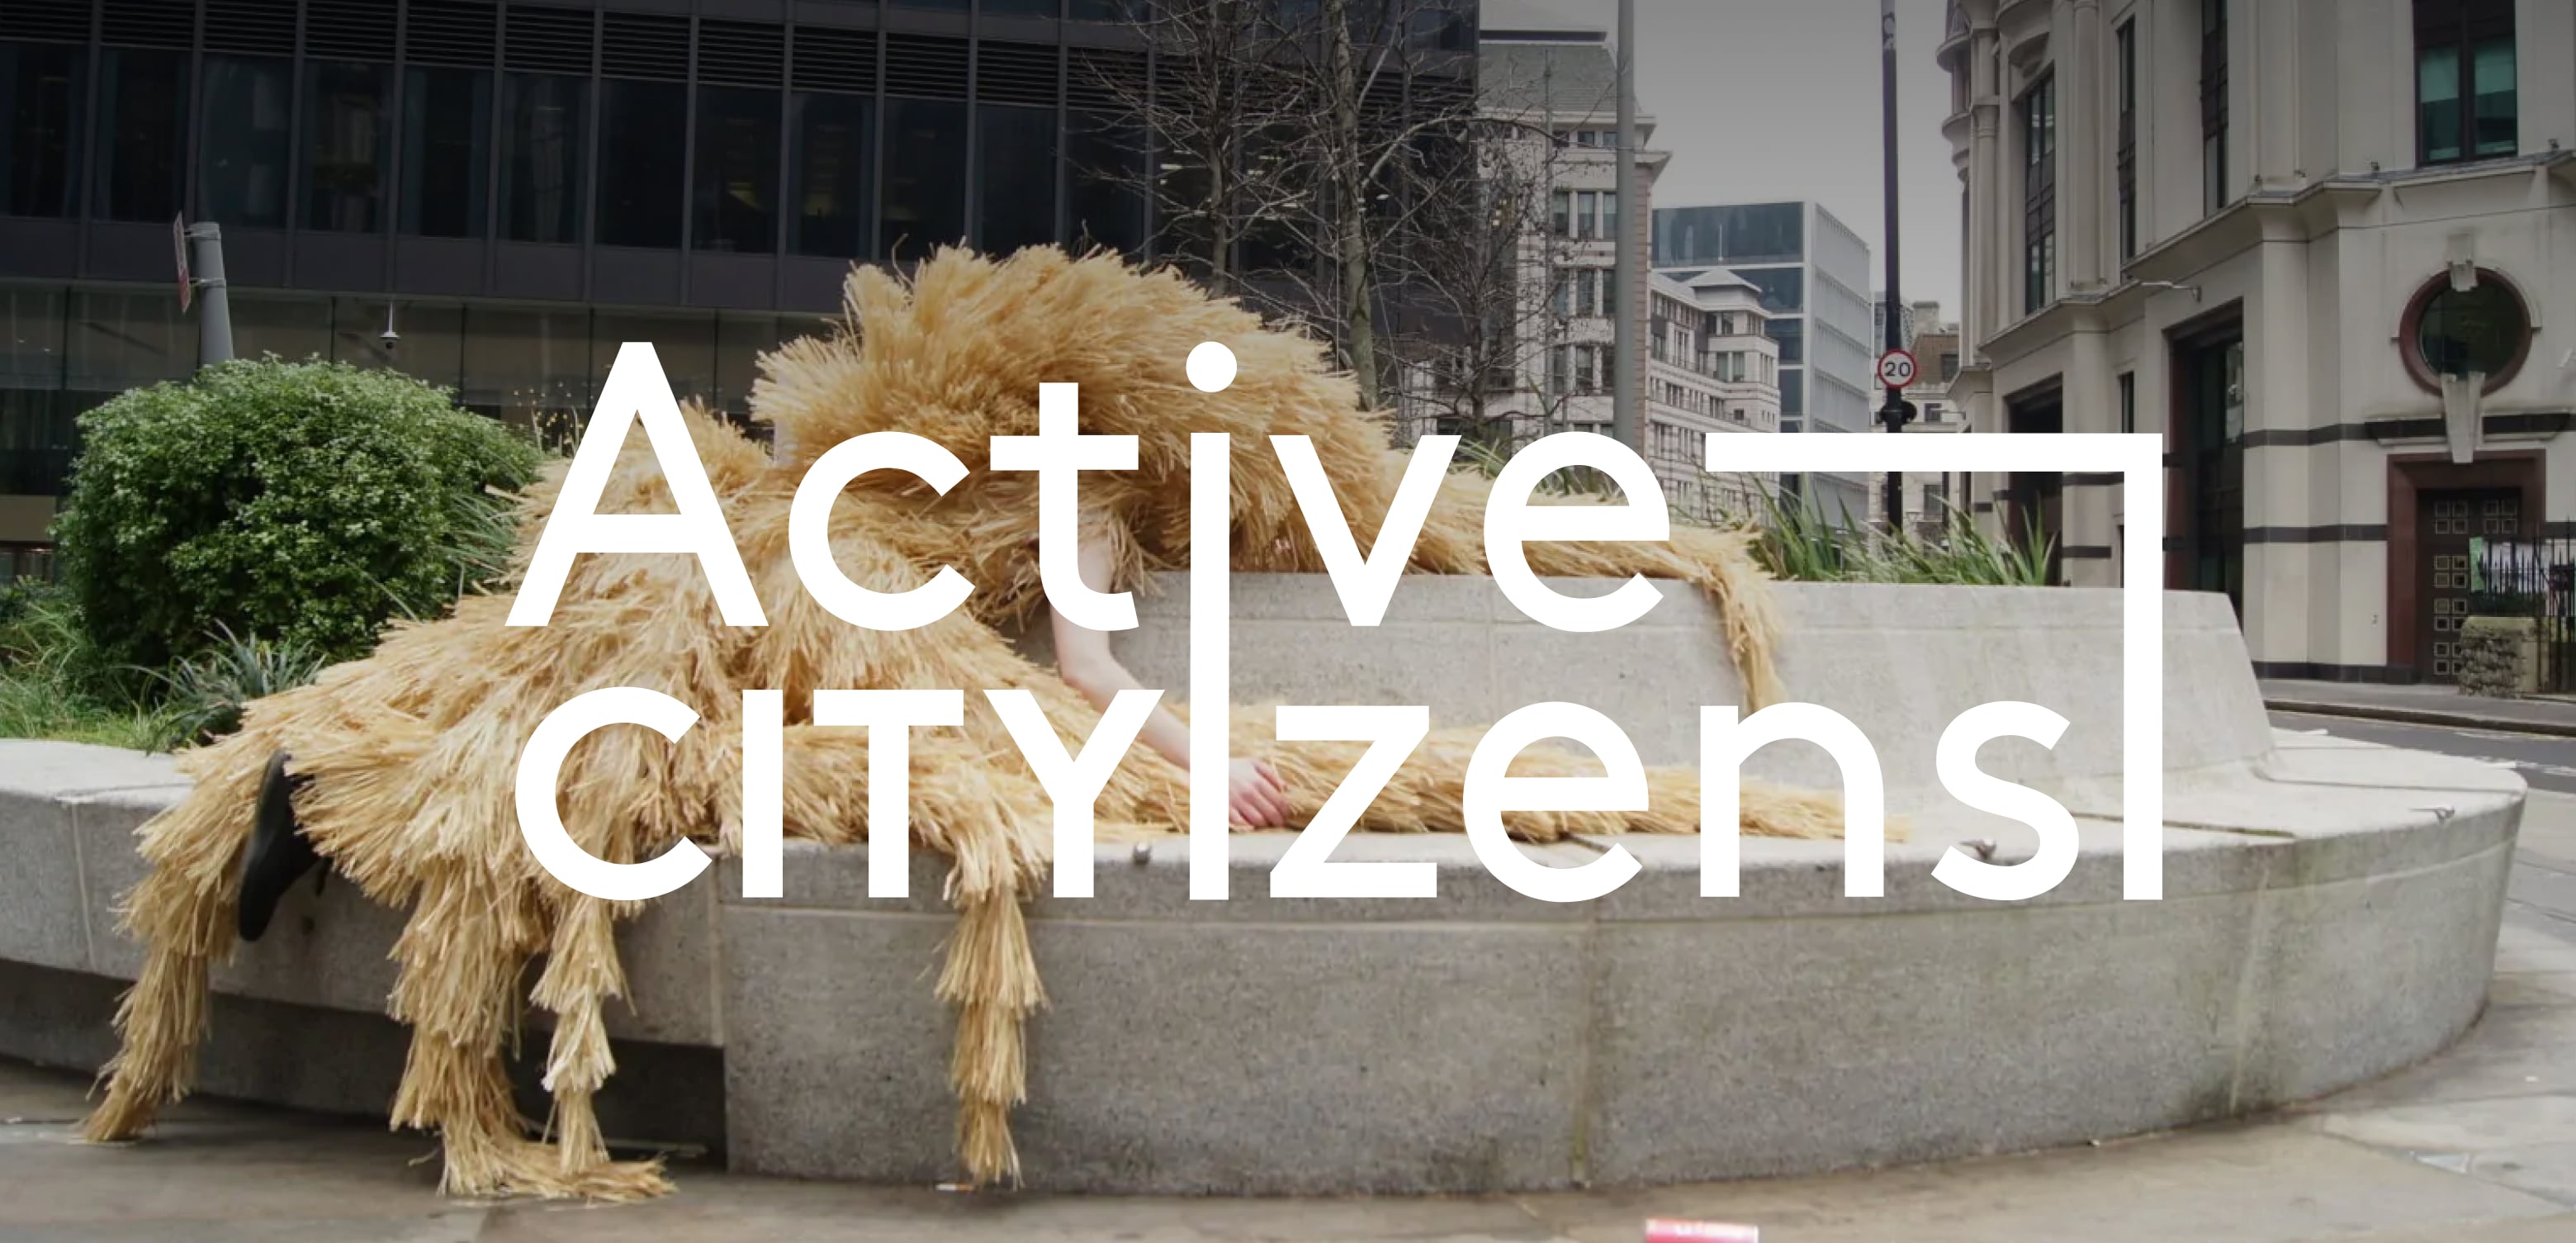 The implementation of the Active City(ZENS) project has begun